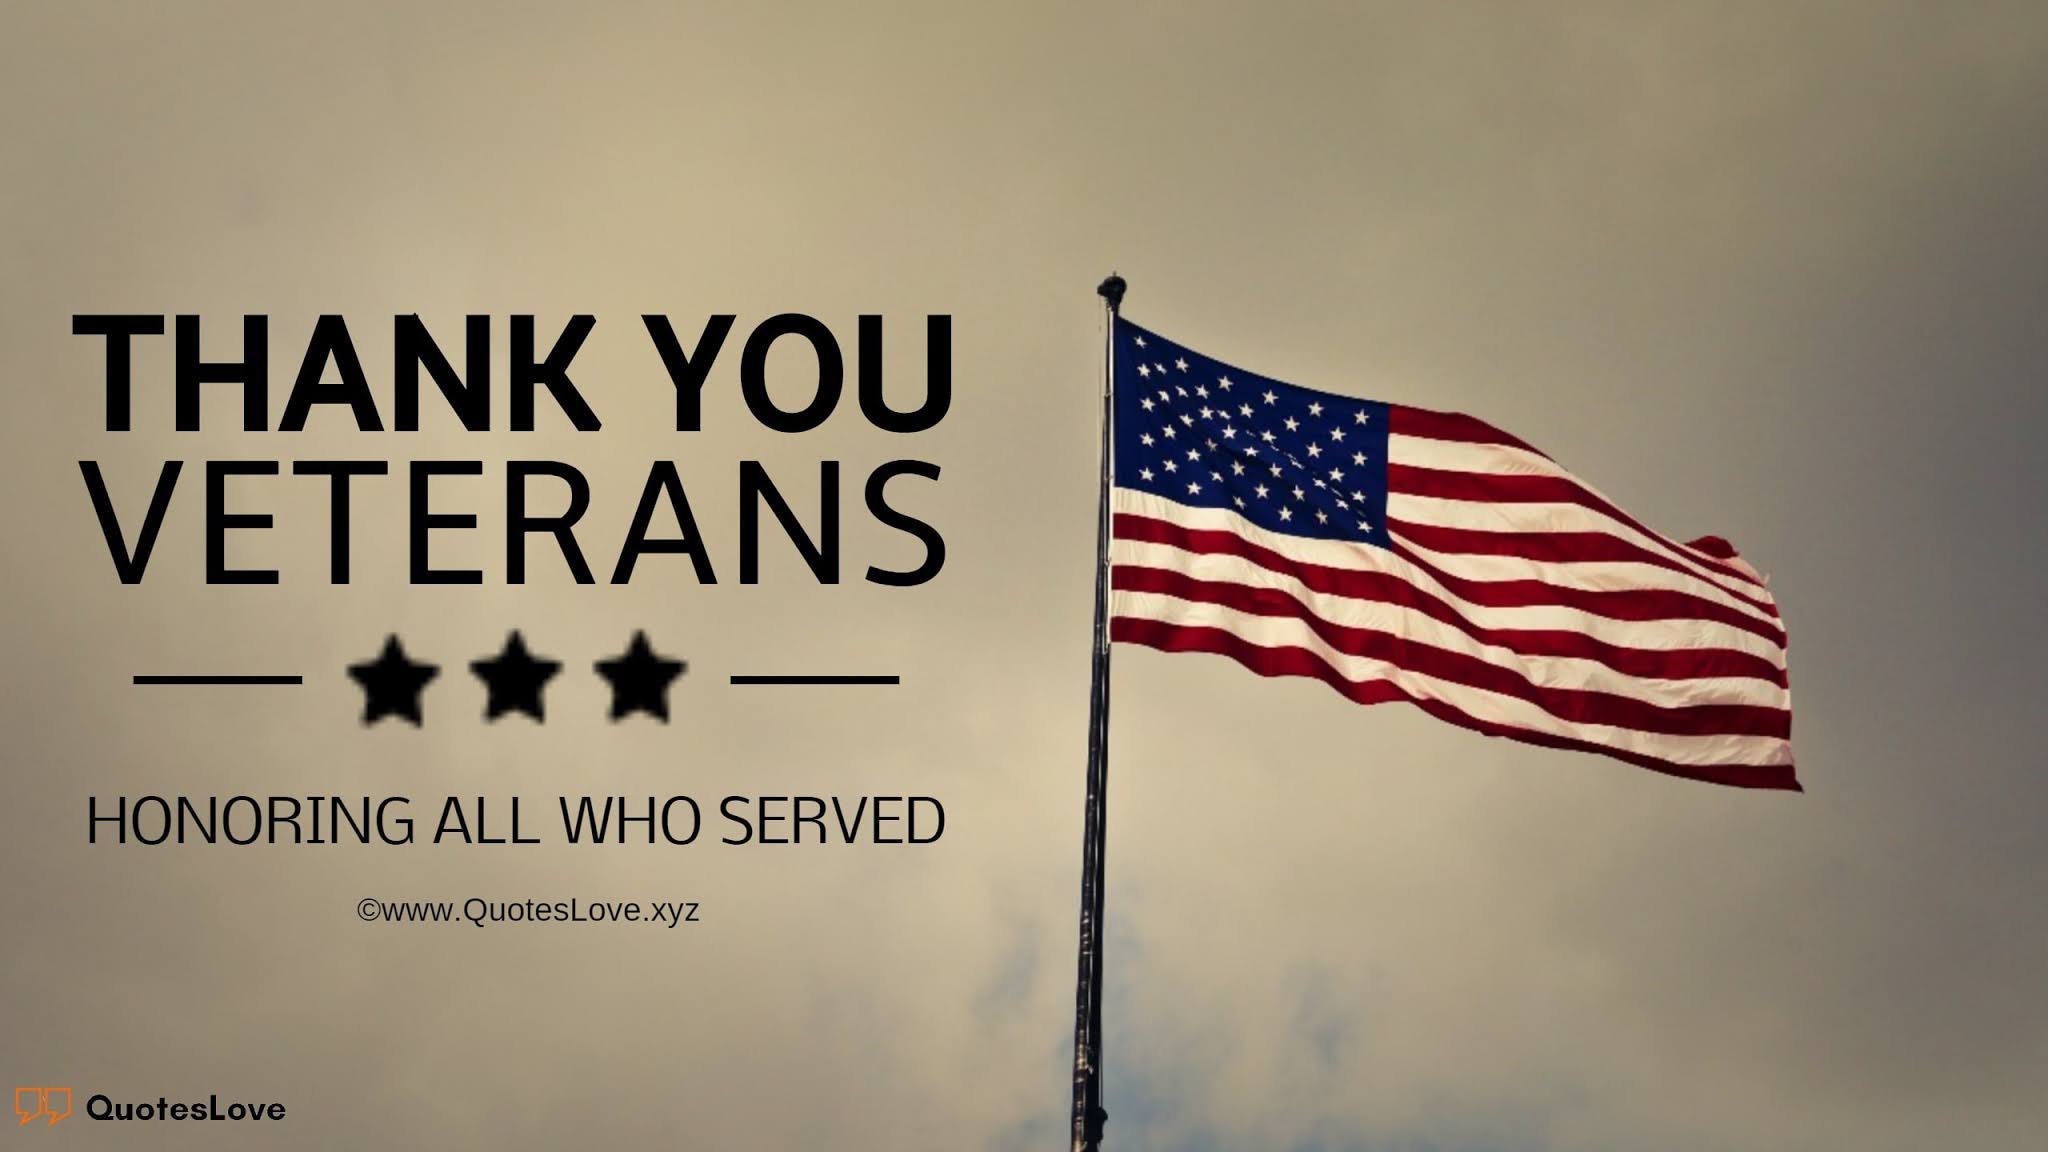 53+ [Best] Veterans Day 2022: Quotes, Sayings, Slogans, Wishes, Greetings, Messages, Image, Poster, Pictures, Photos